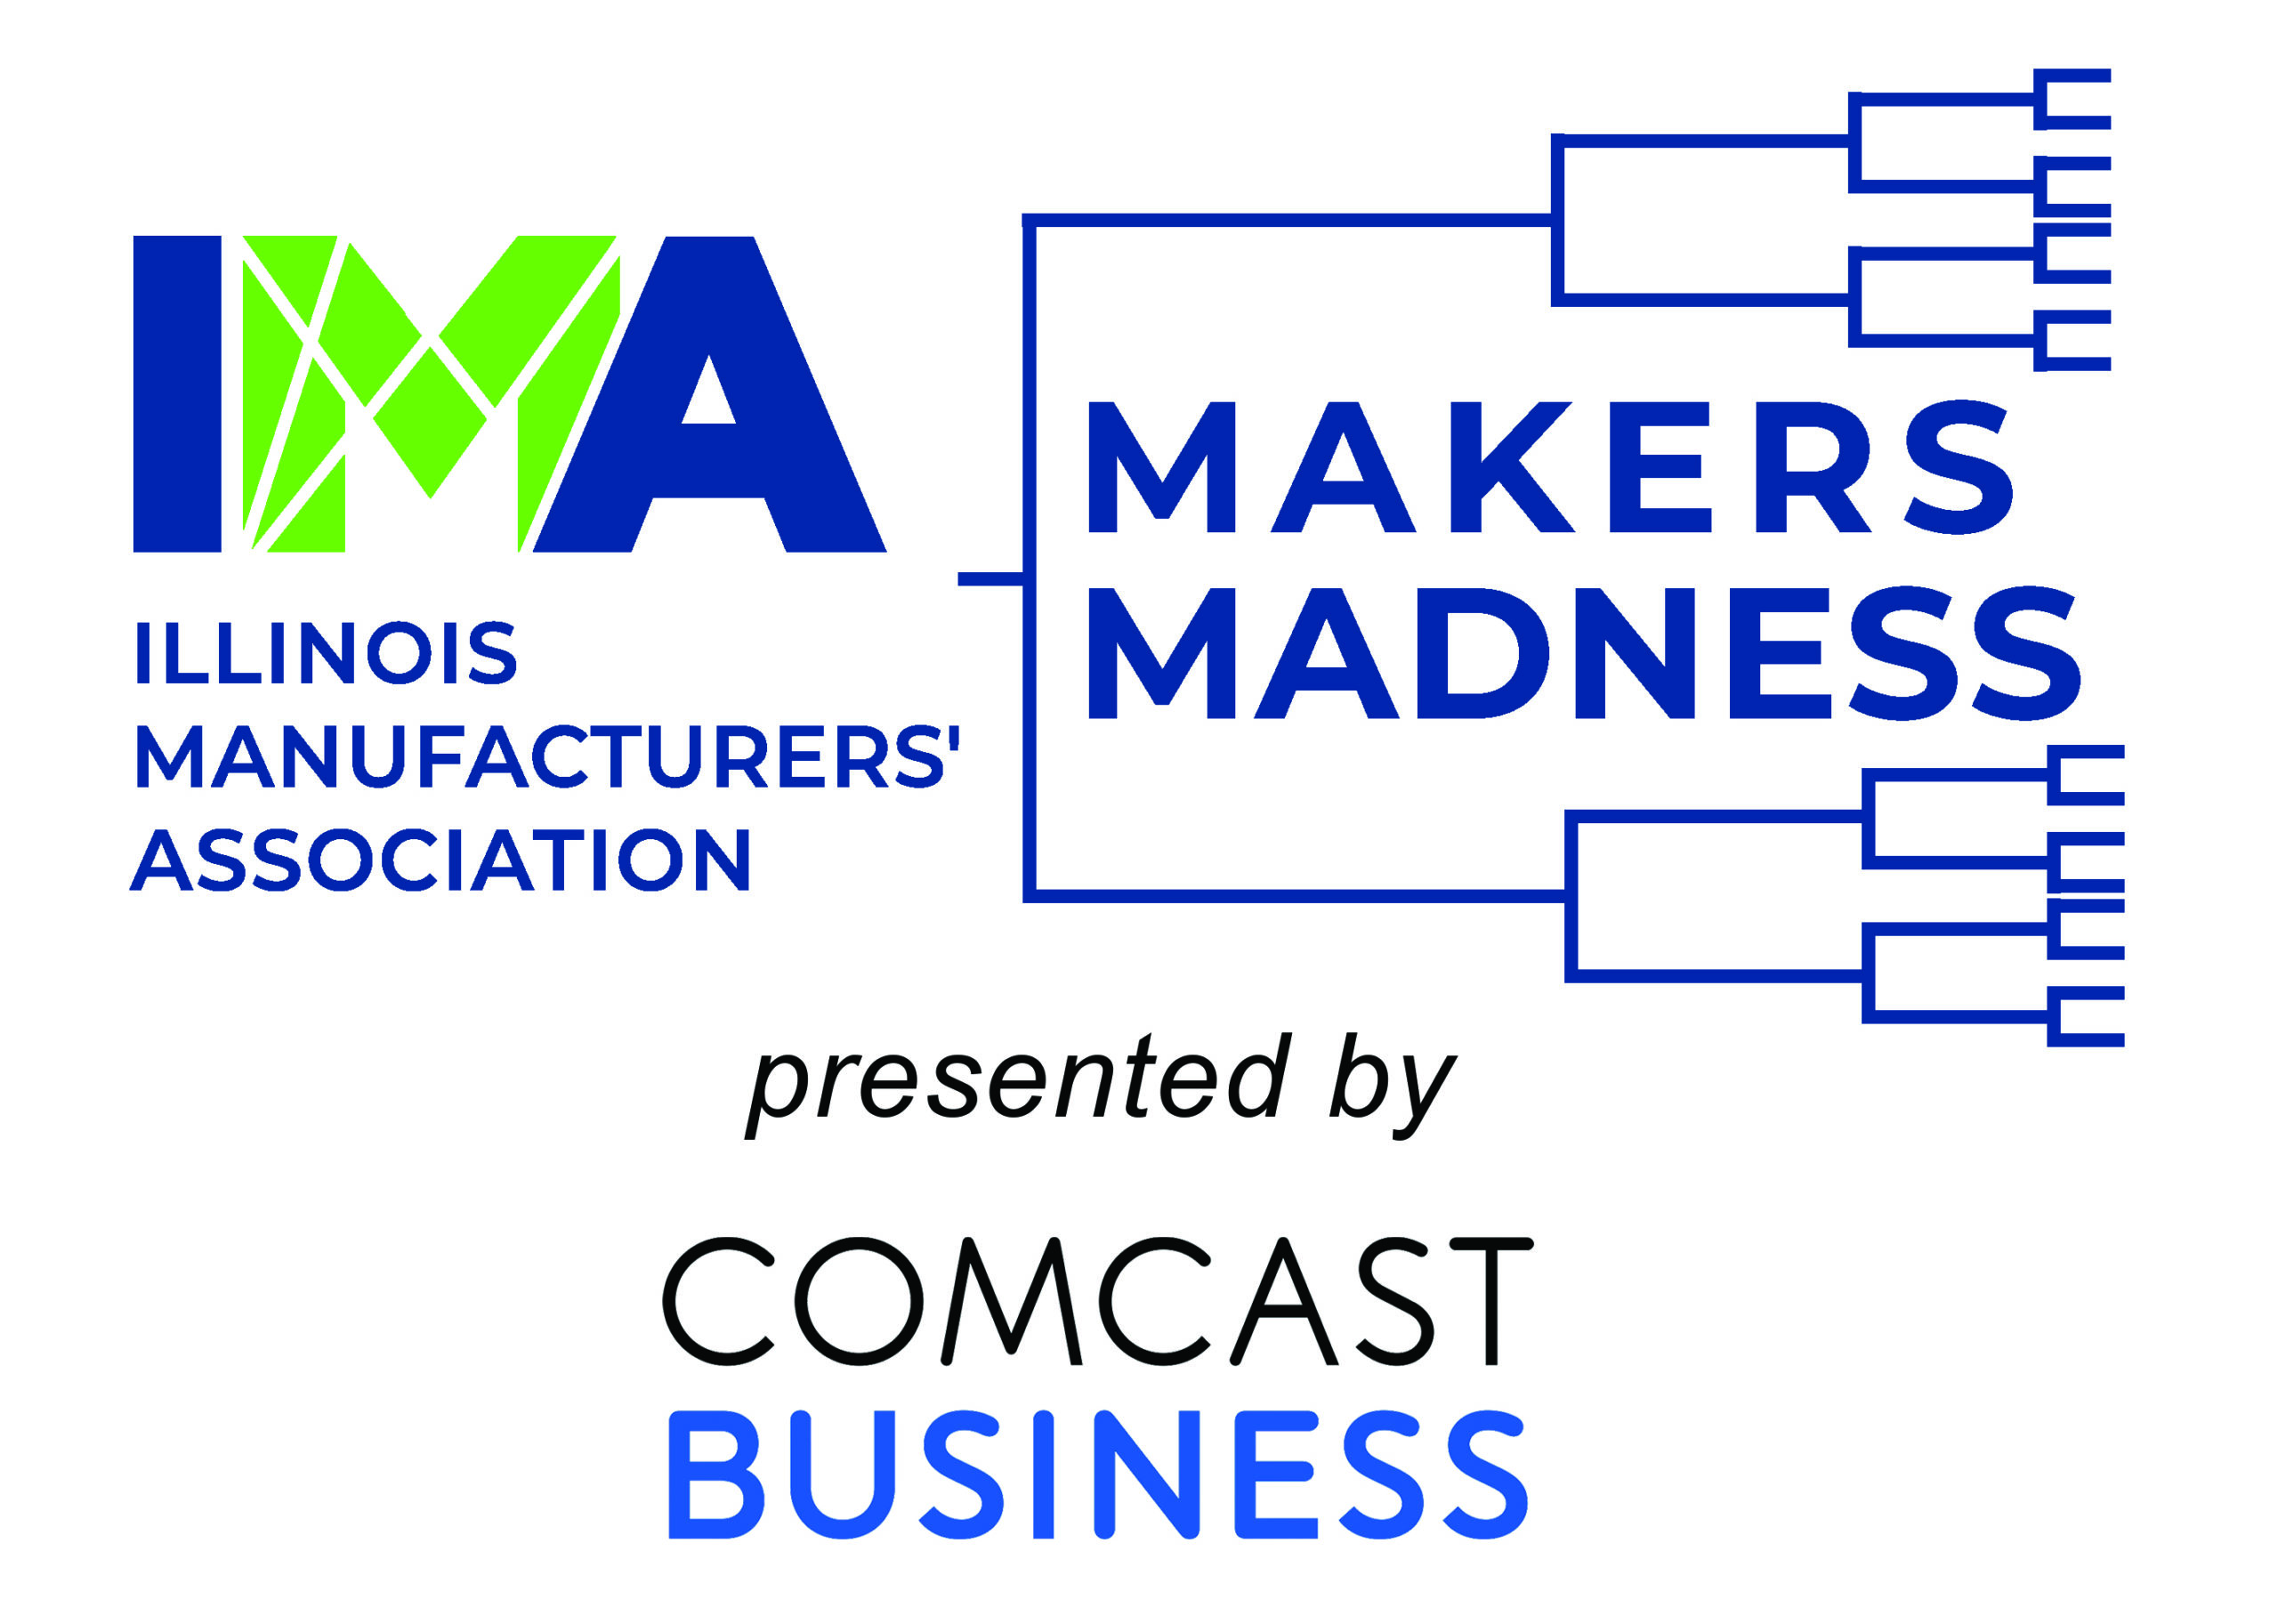 The Illinois Manufacturers’ Association's “Makers Madness” contest